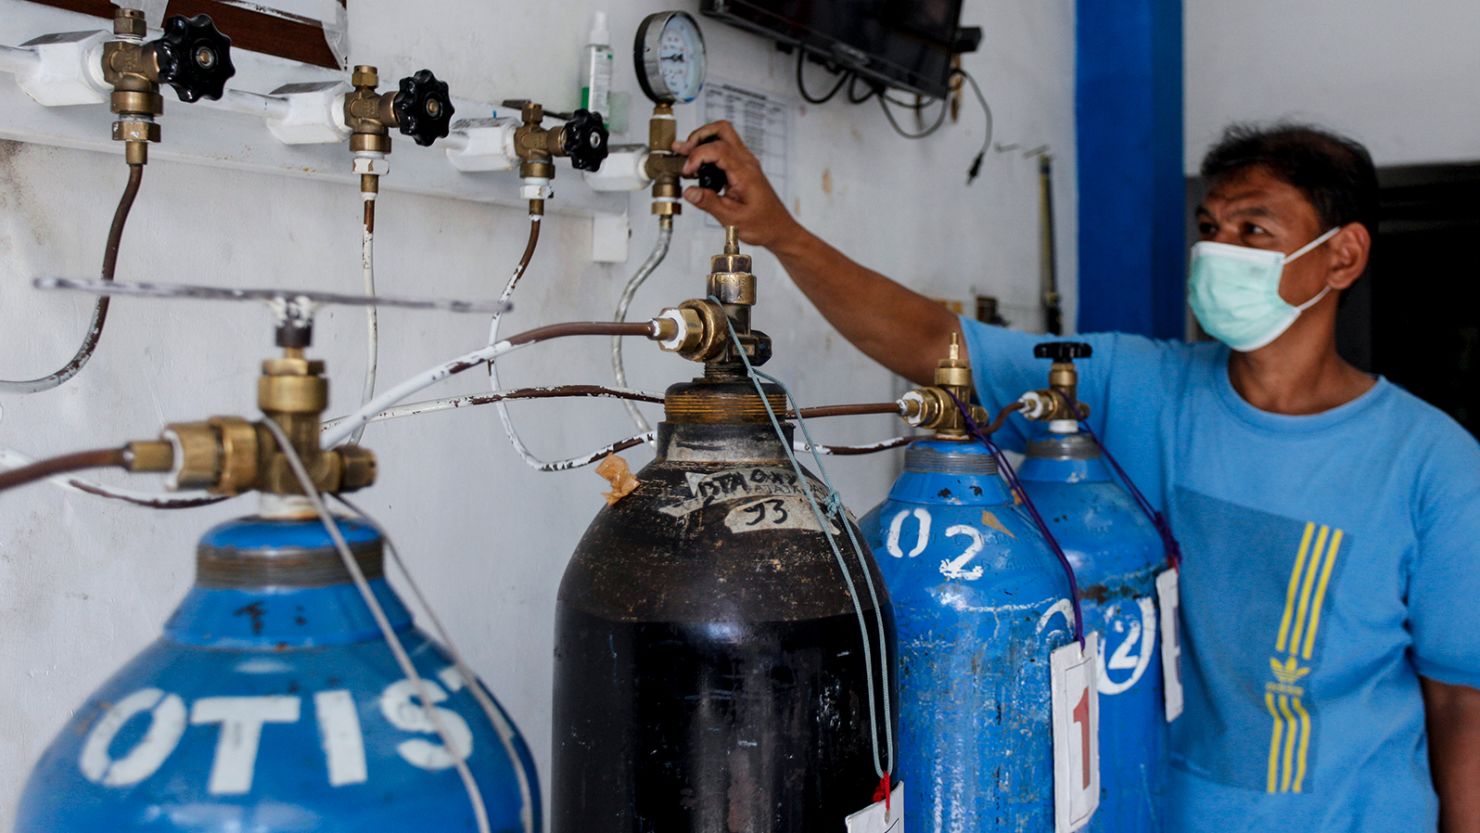 A worker refills oxygen cylinders for treating patients as the demand for medical oxygen increased in Bogor, West Java, Indonesia on June 25, 2021.